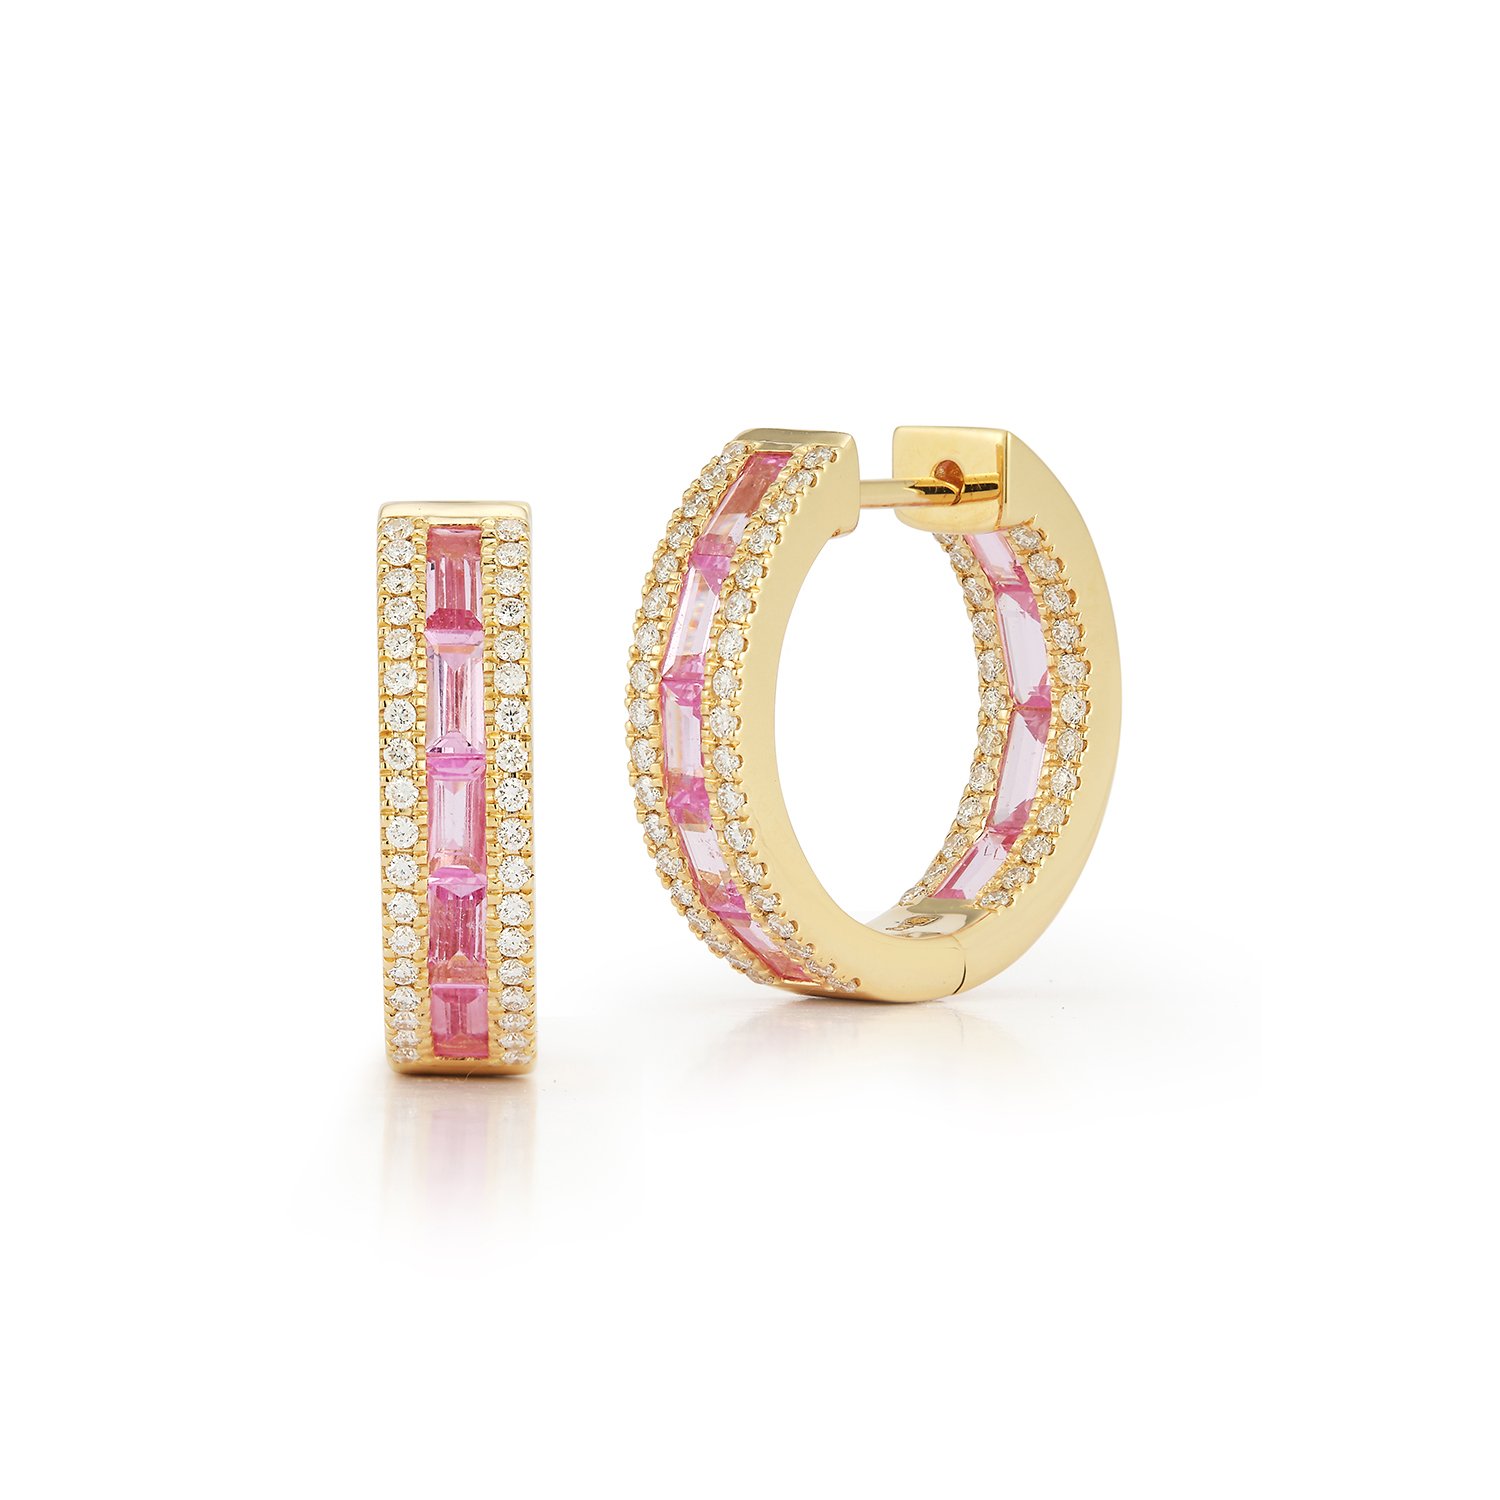 Origami Mini Huggie Hoop Earrings with Light Pink Sapphires and White Diamonds in 18kt Yellow Gold